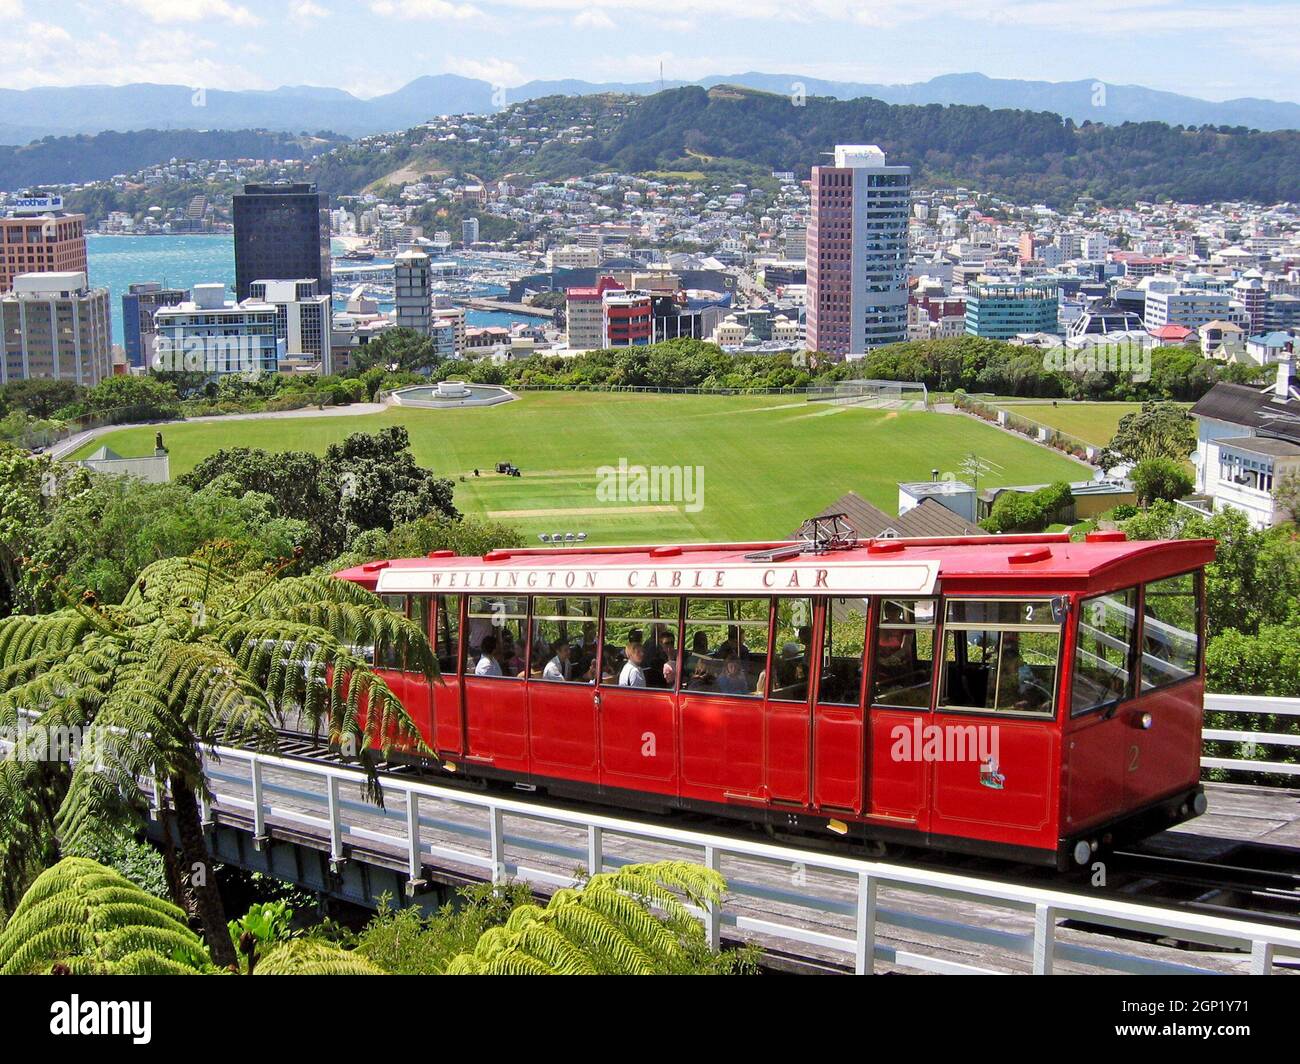 The iconic Wellington Cable Car transports people up from the Wellington Central Business District passing Kelburn Park while offering panoramic views of the city.  The funicular railway car has been in operation since 1902 carrying passengers from Bambto Quay in the Wellington CBD up to the suburb of Kelburn. Stock Photo